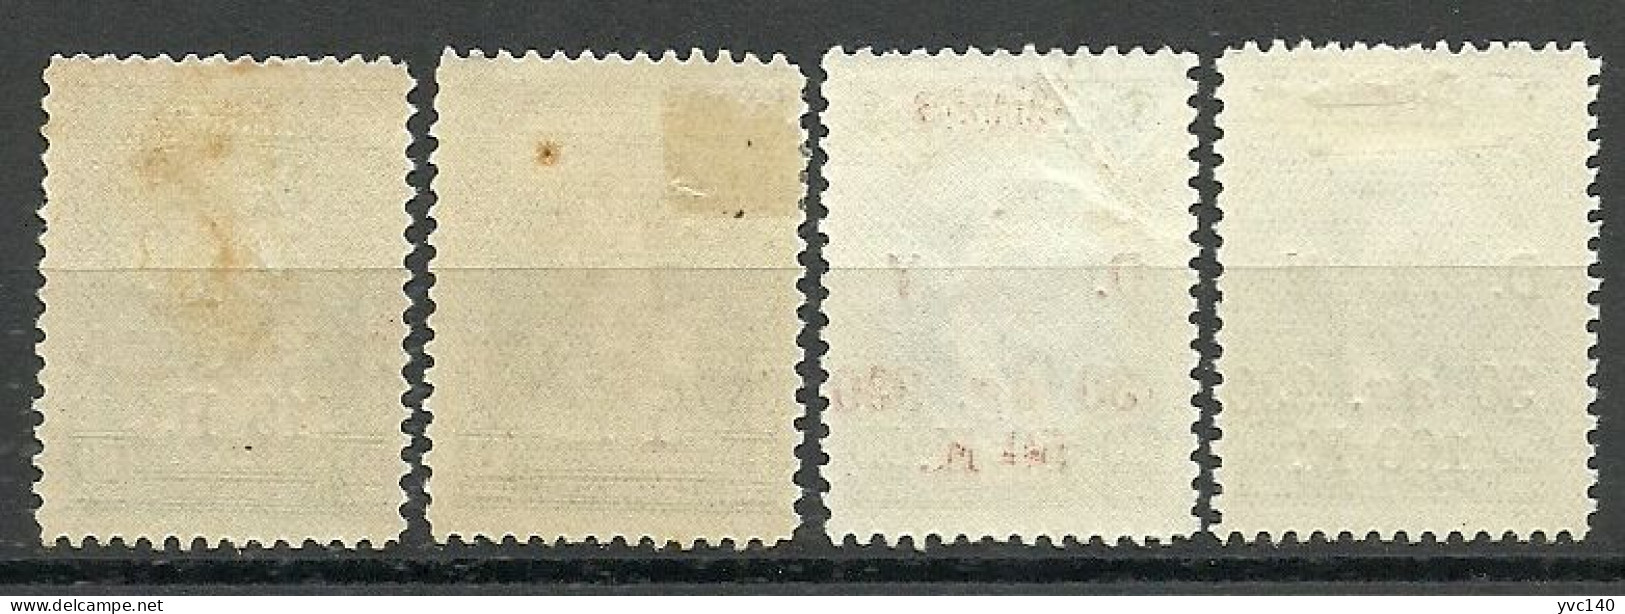 Turkey; 1930 Ankara-Sivas Railway Stamps ERROR "The Dot In Front Of The Letter (Y) Is Missing" MNH**/MH* RRR - Unused Stamps